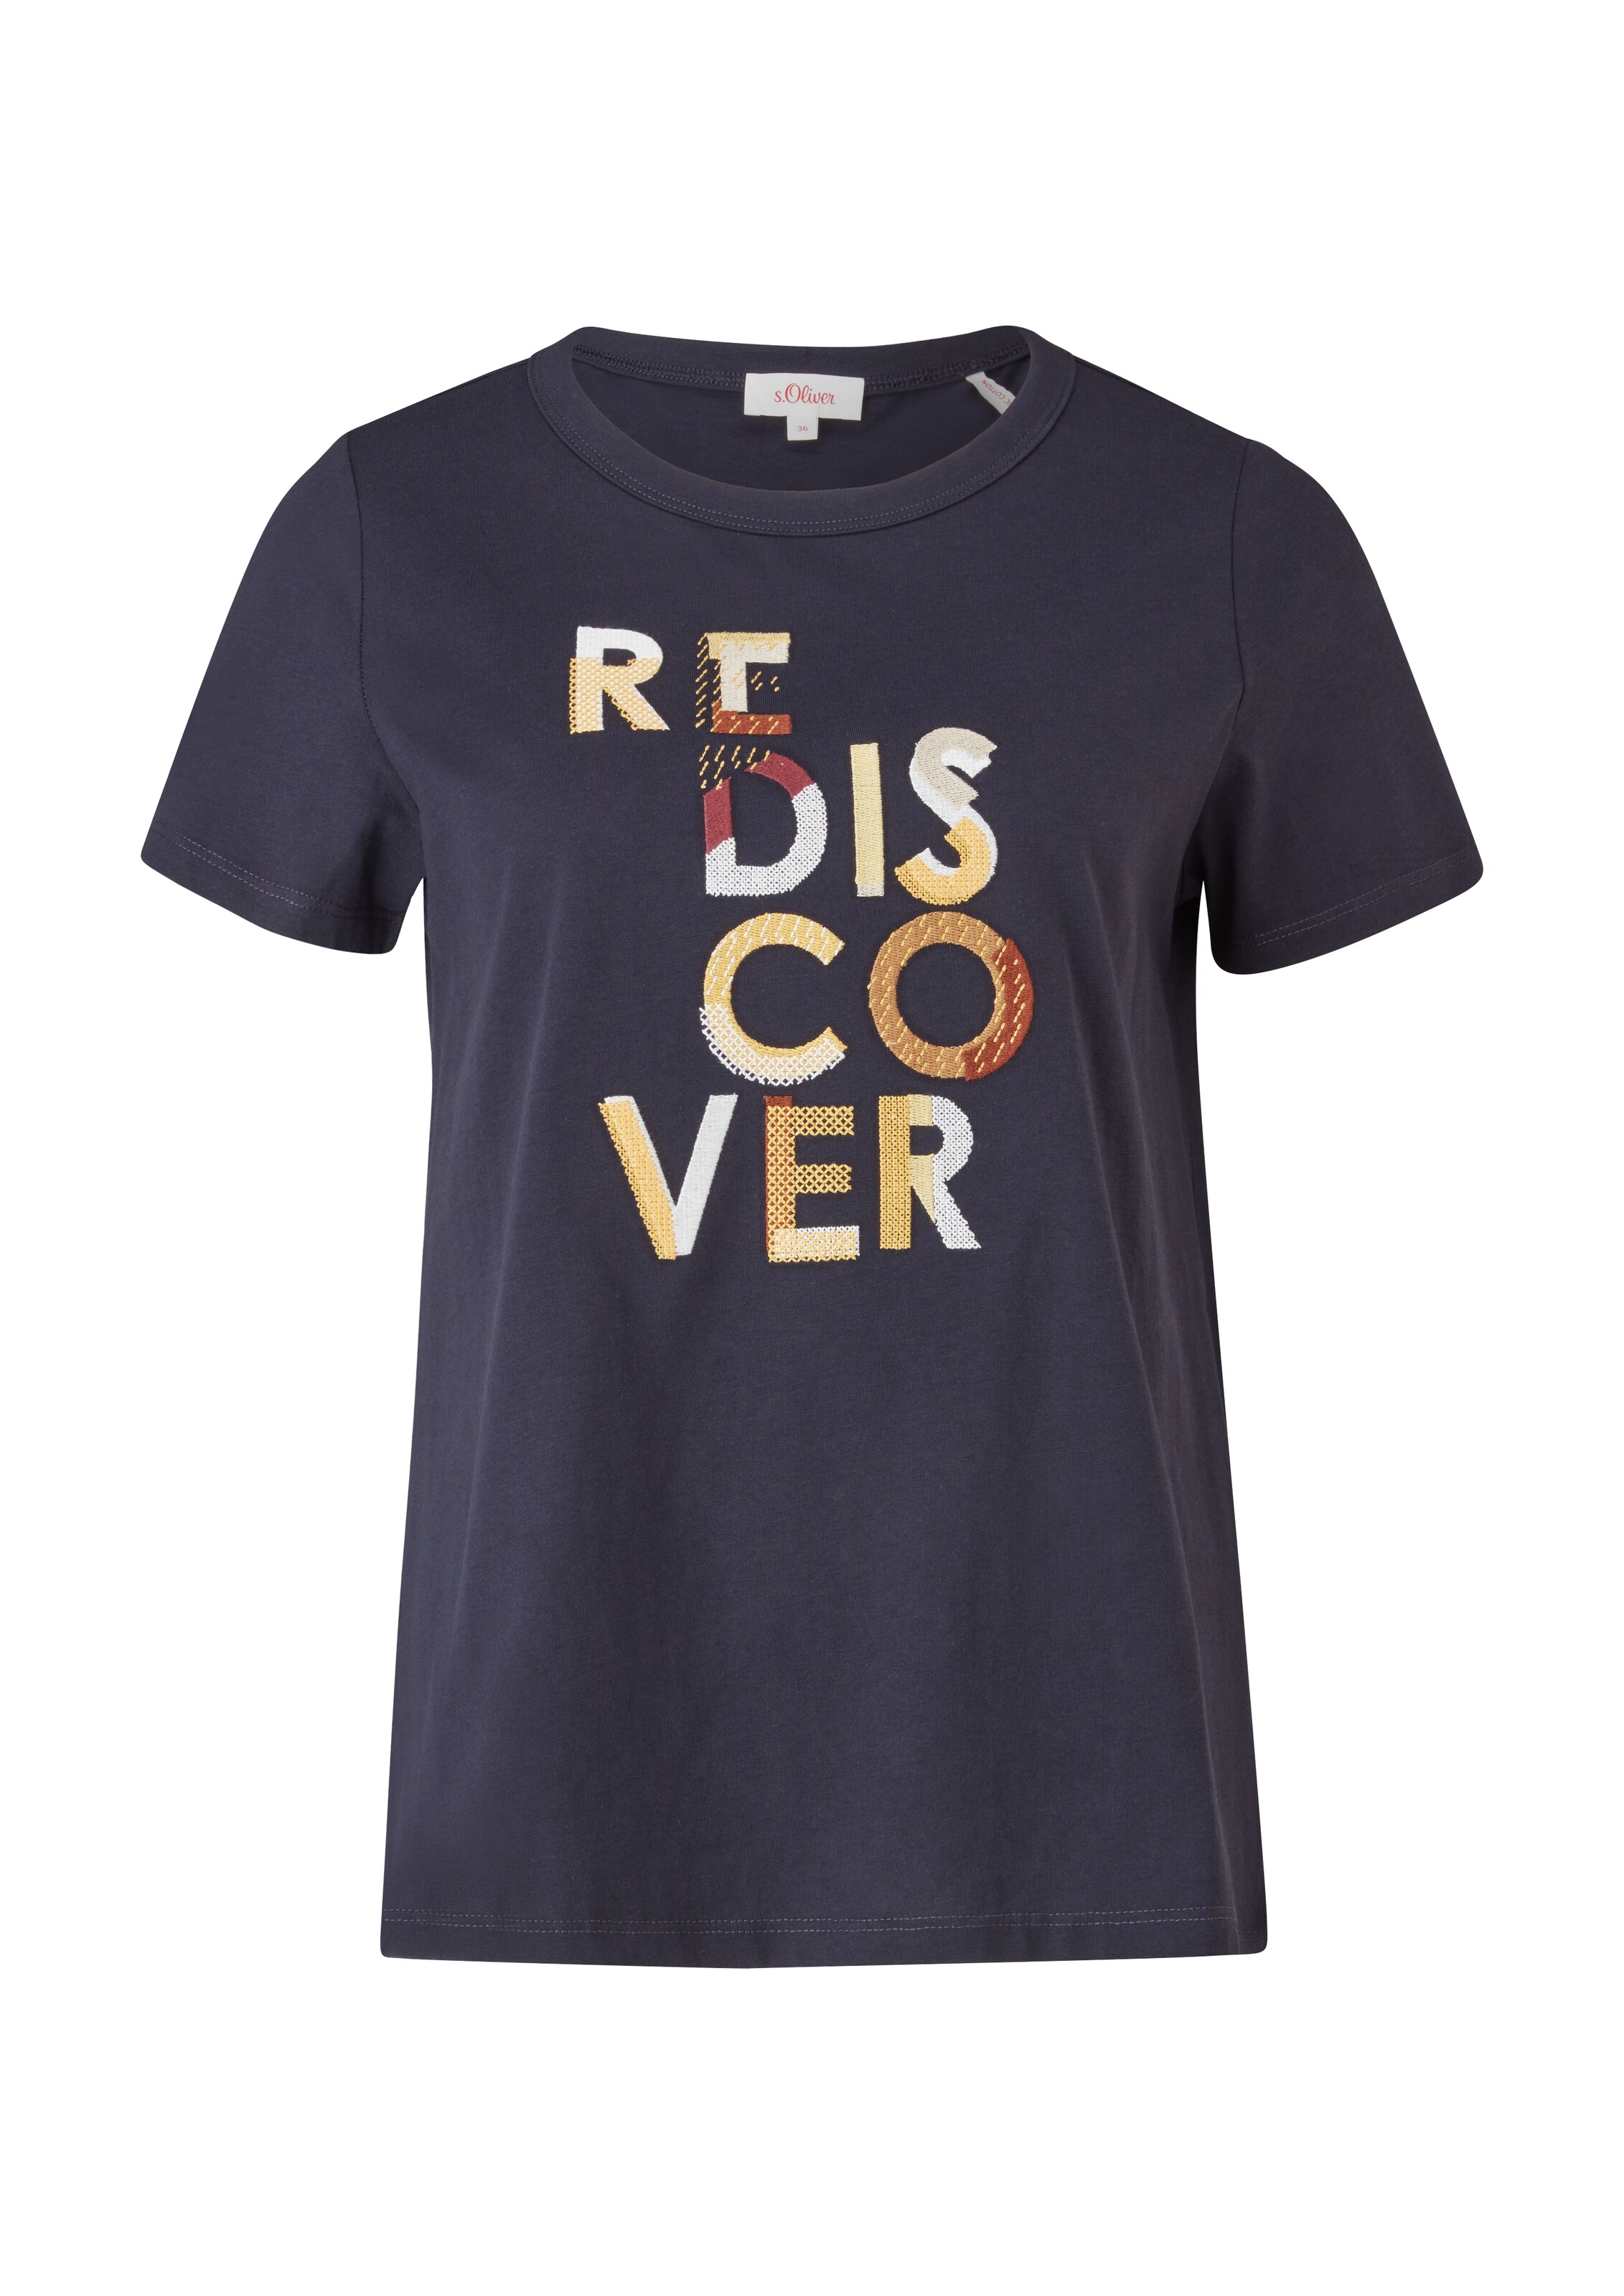 Frauen Shirts & Tops s.Oliver Shirt in Navy - NR88026